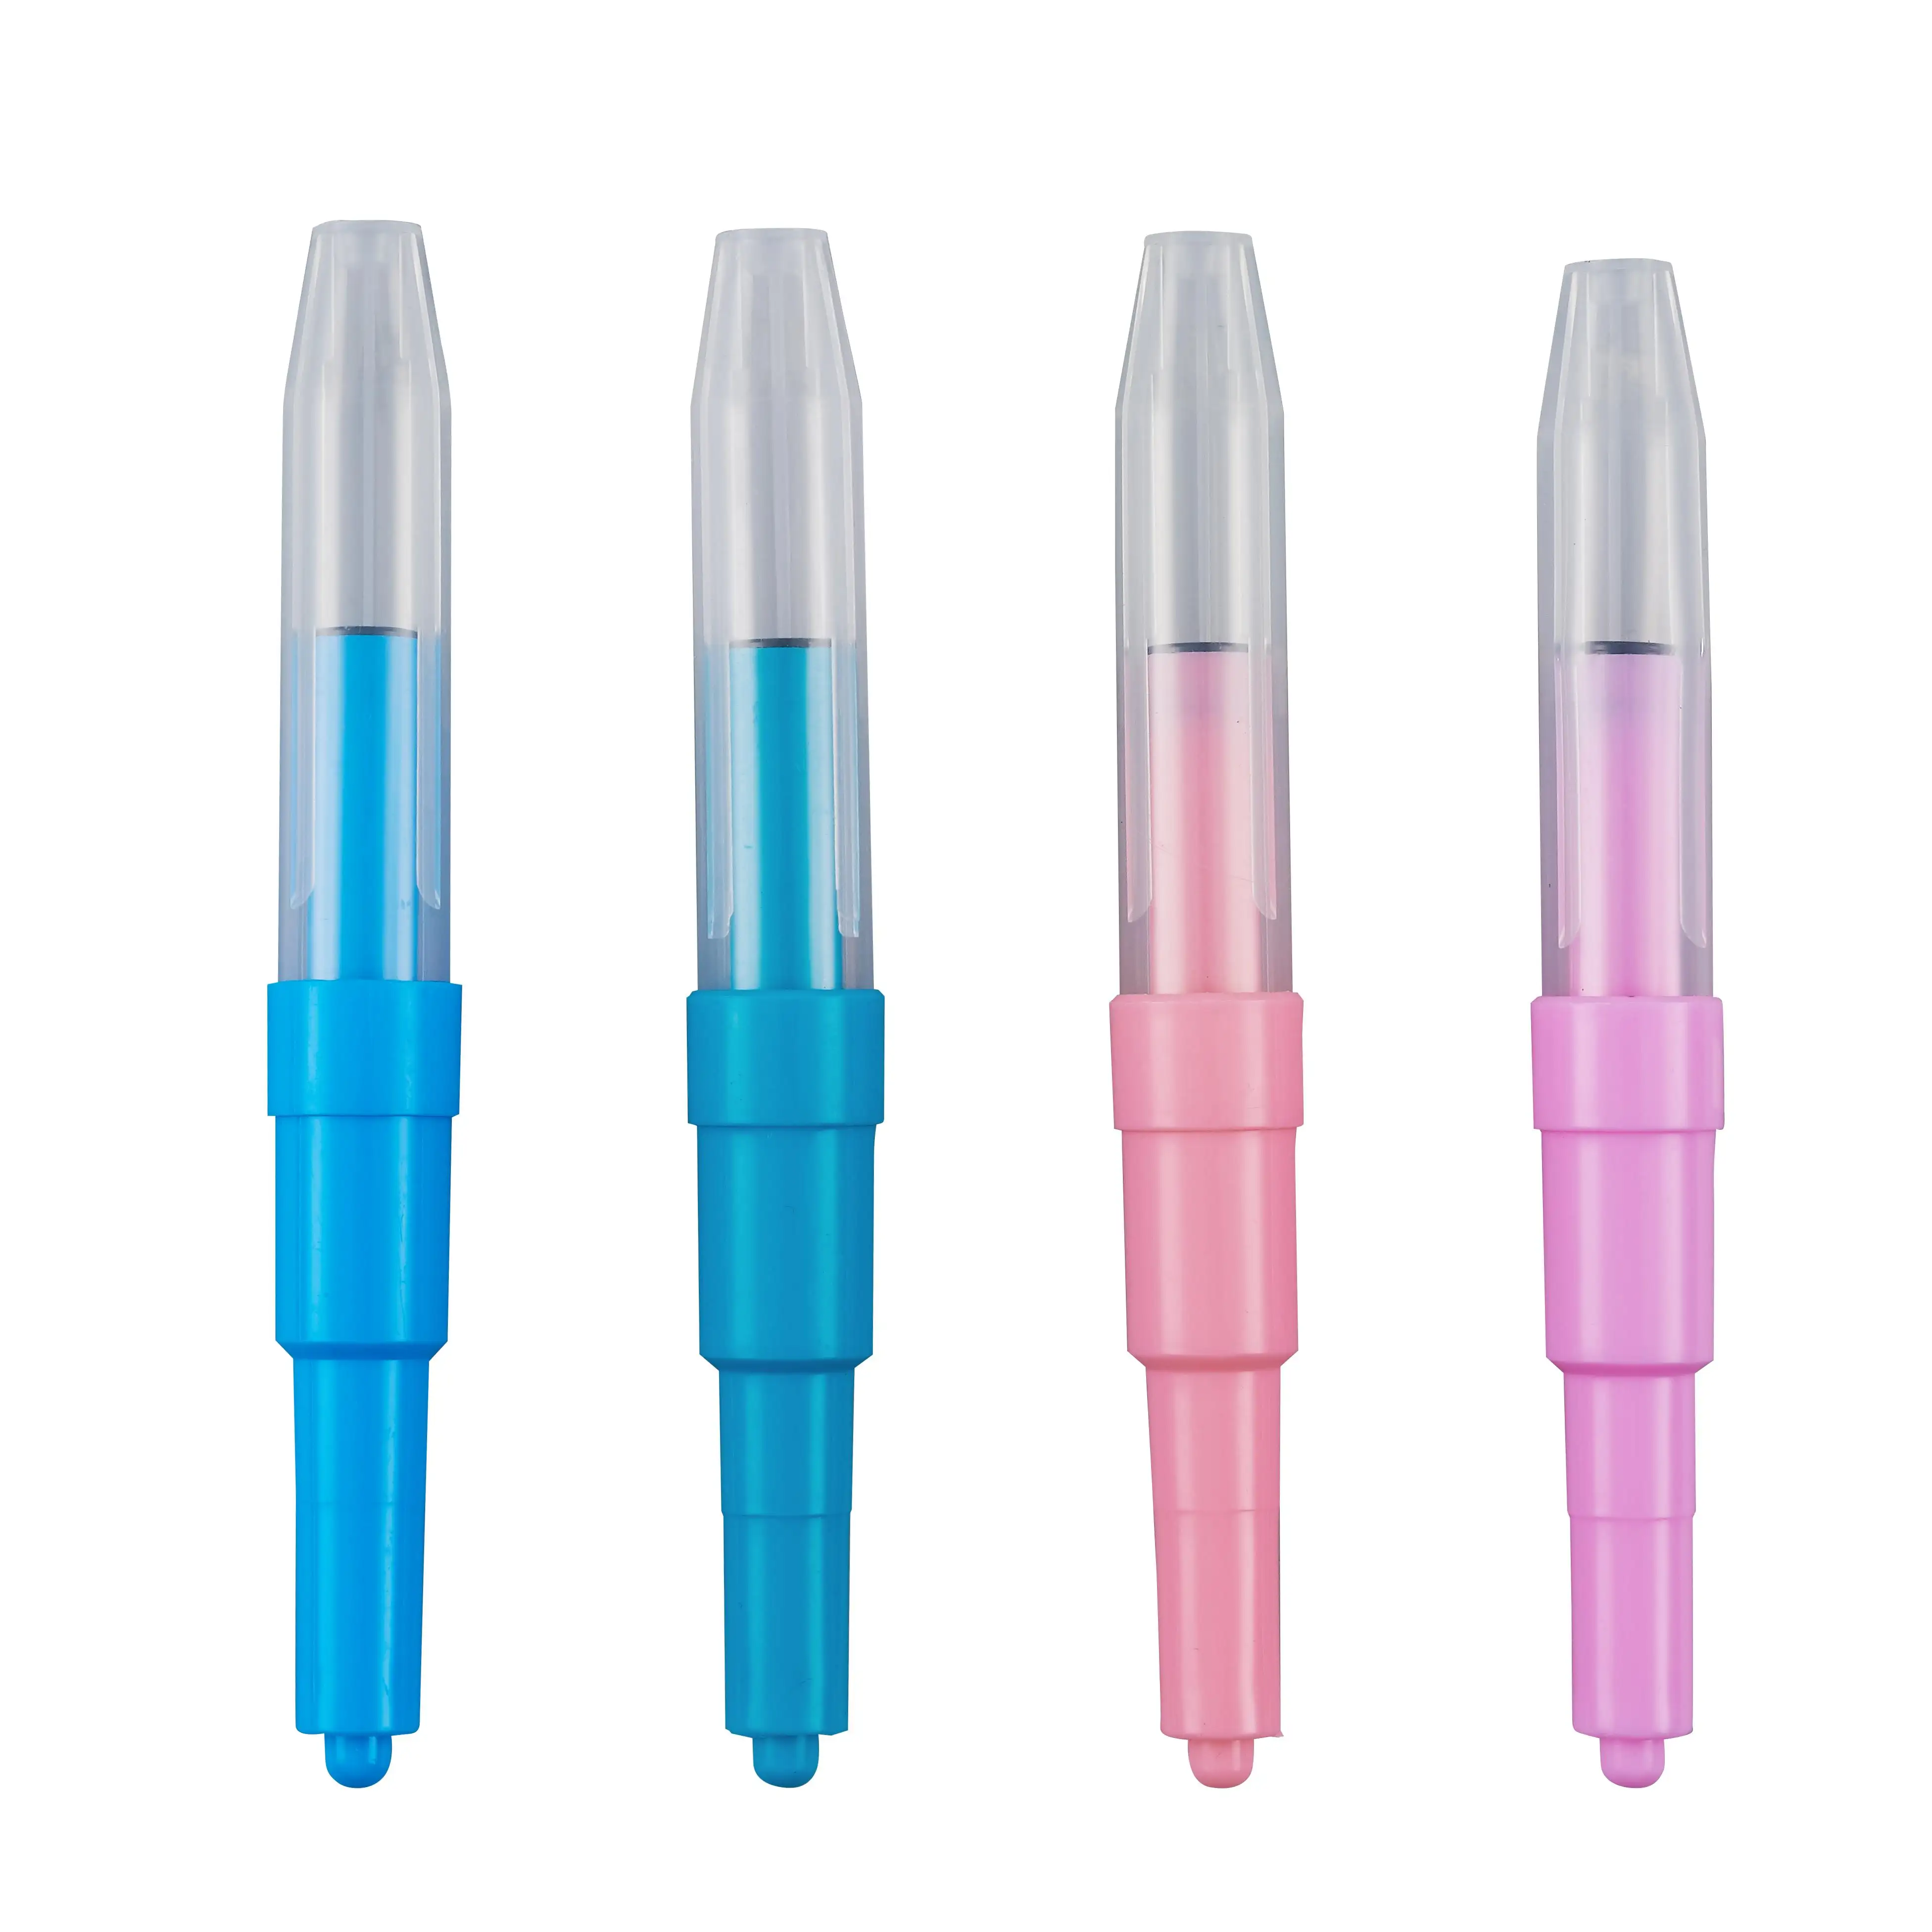 5 Colors Blow Pen Water-Based Ink Washable Non-Toxic Airbrush Pens For Kids Playing And Pet Hair Dye